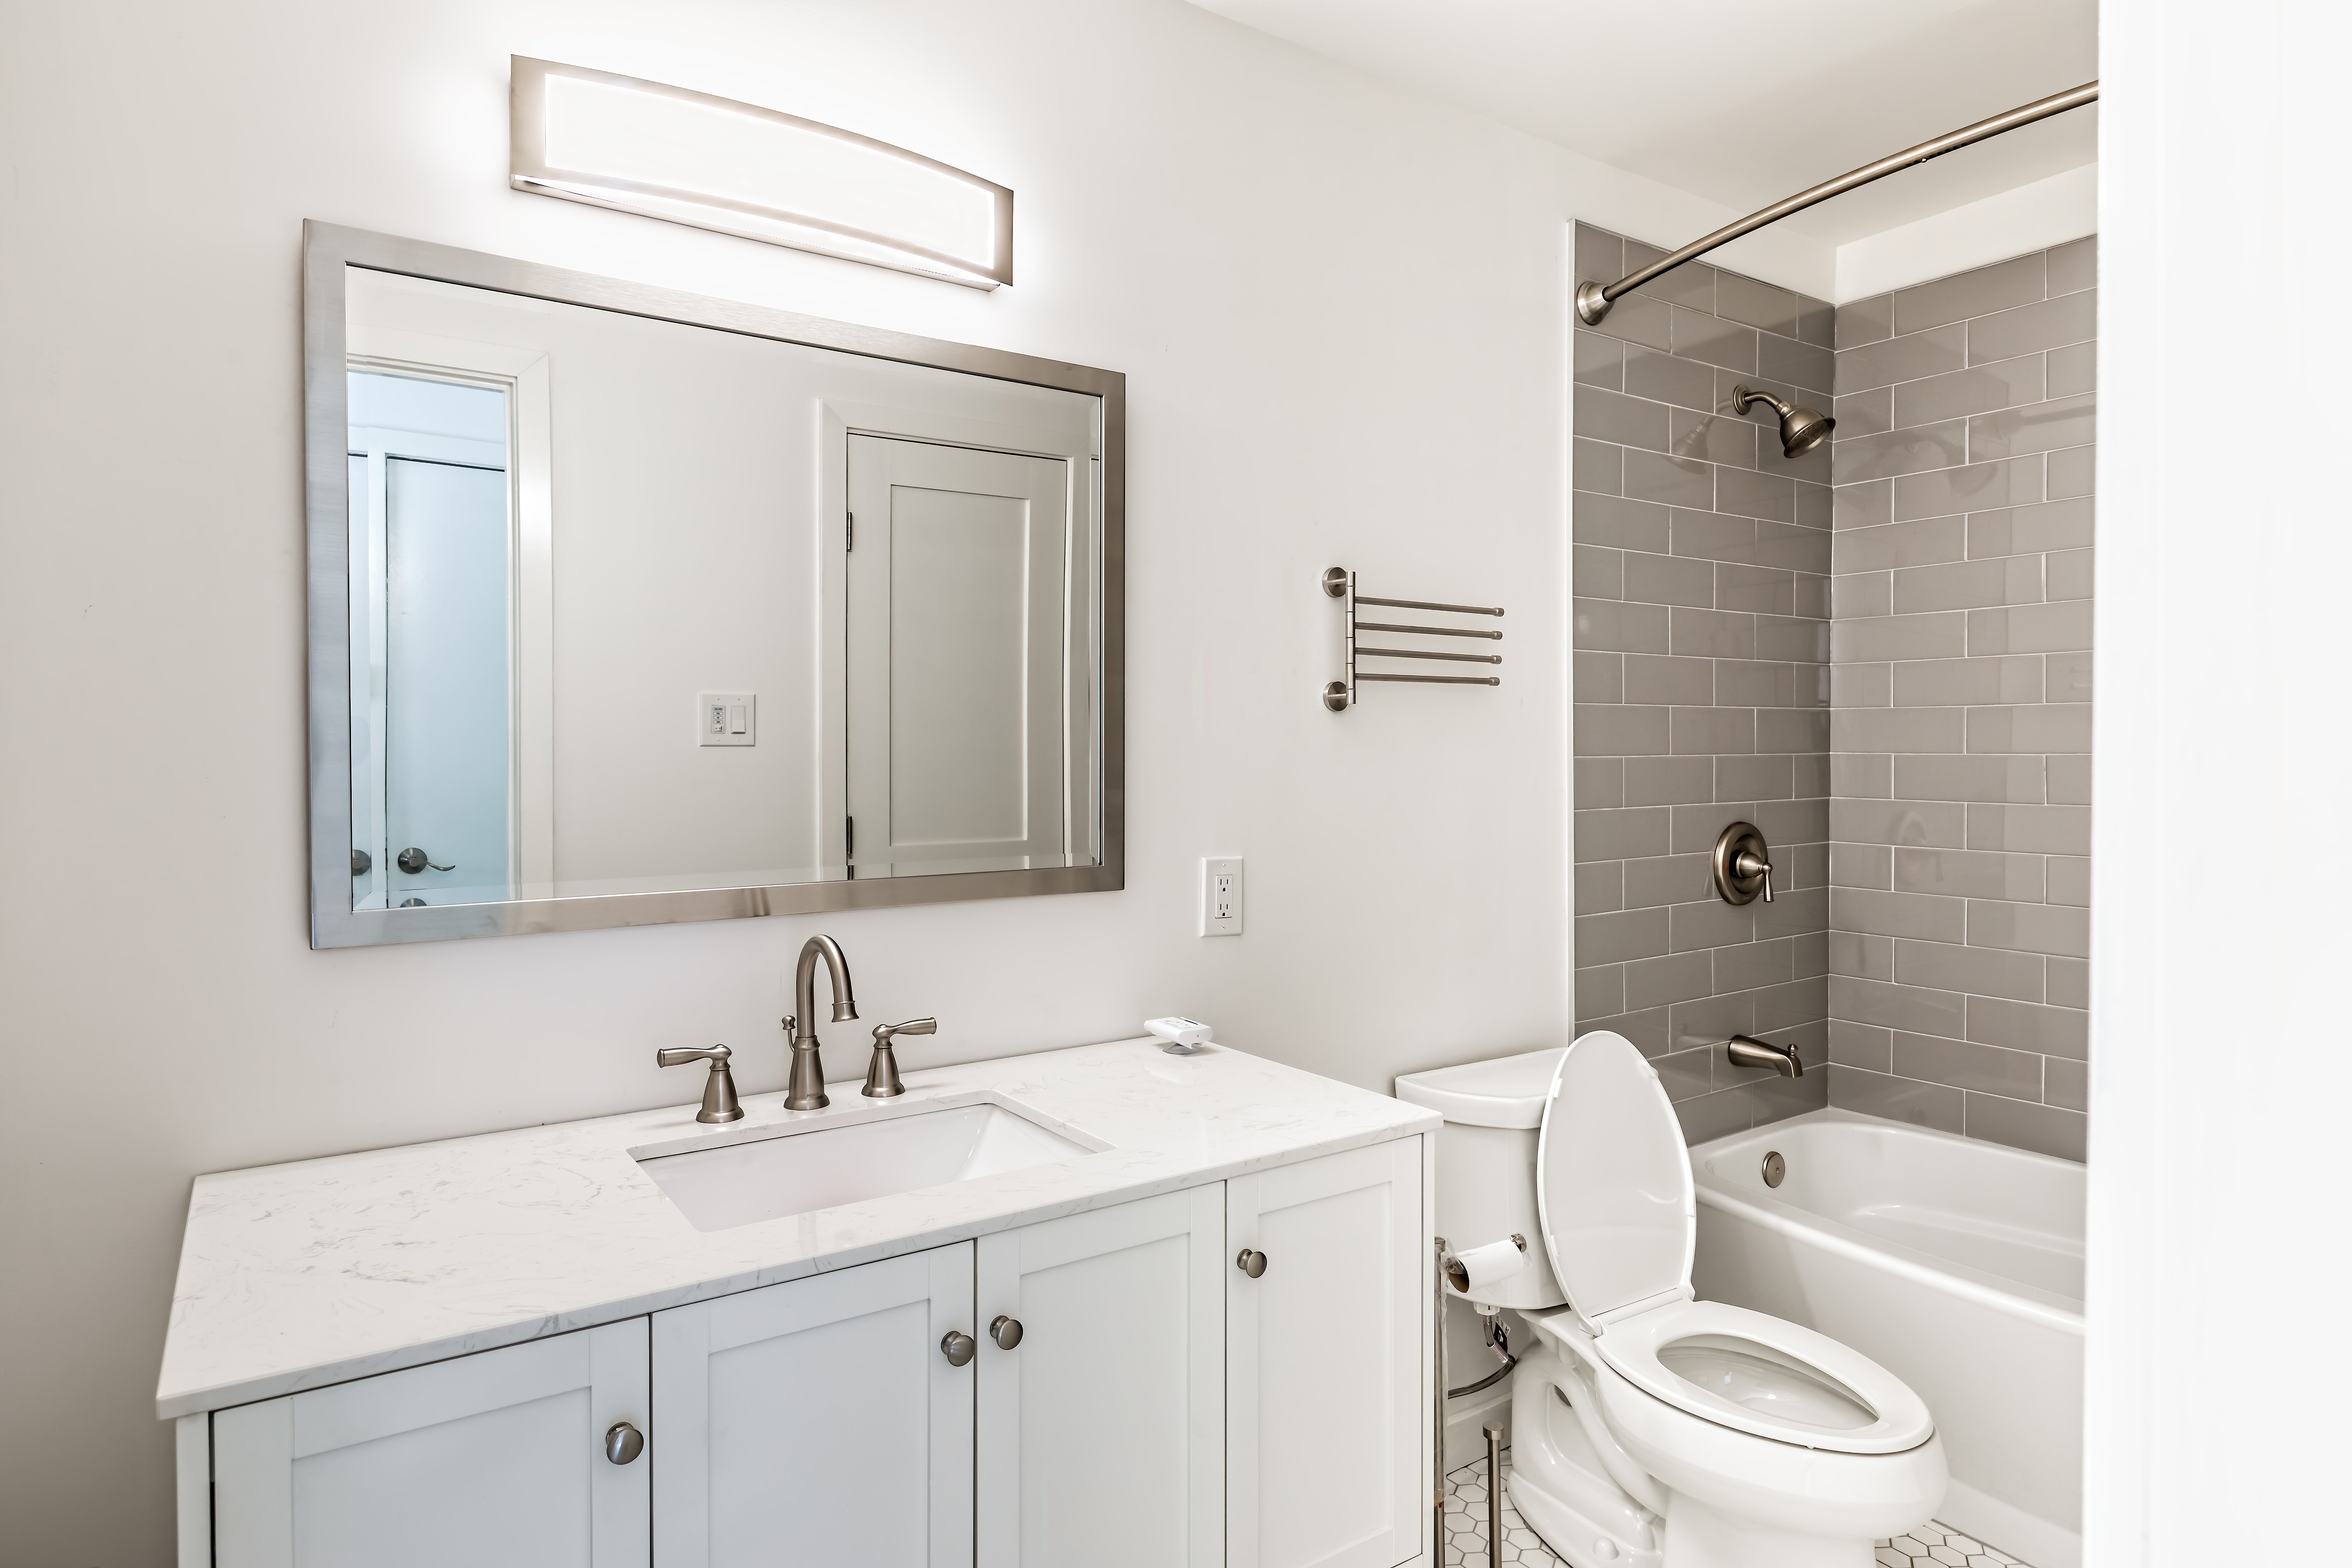 How To Start A Bathroom Remodeling Business